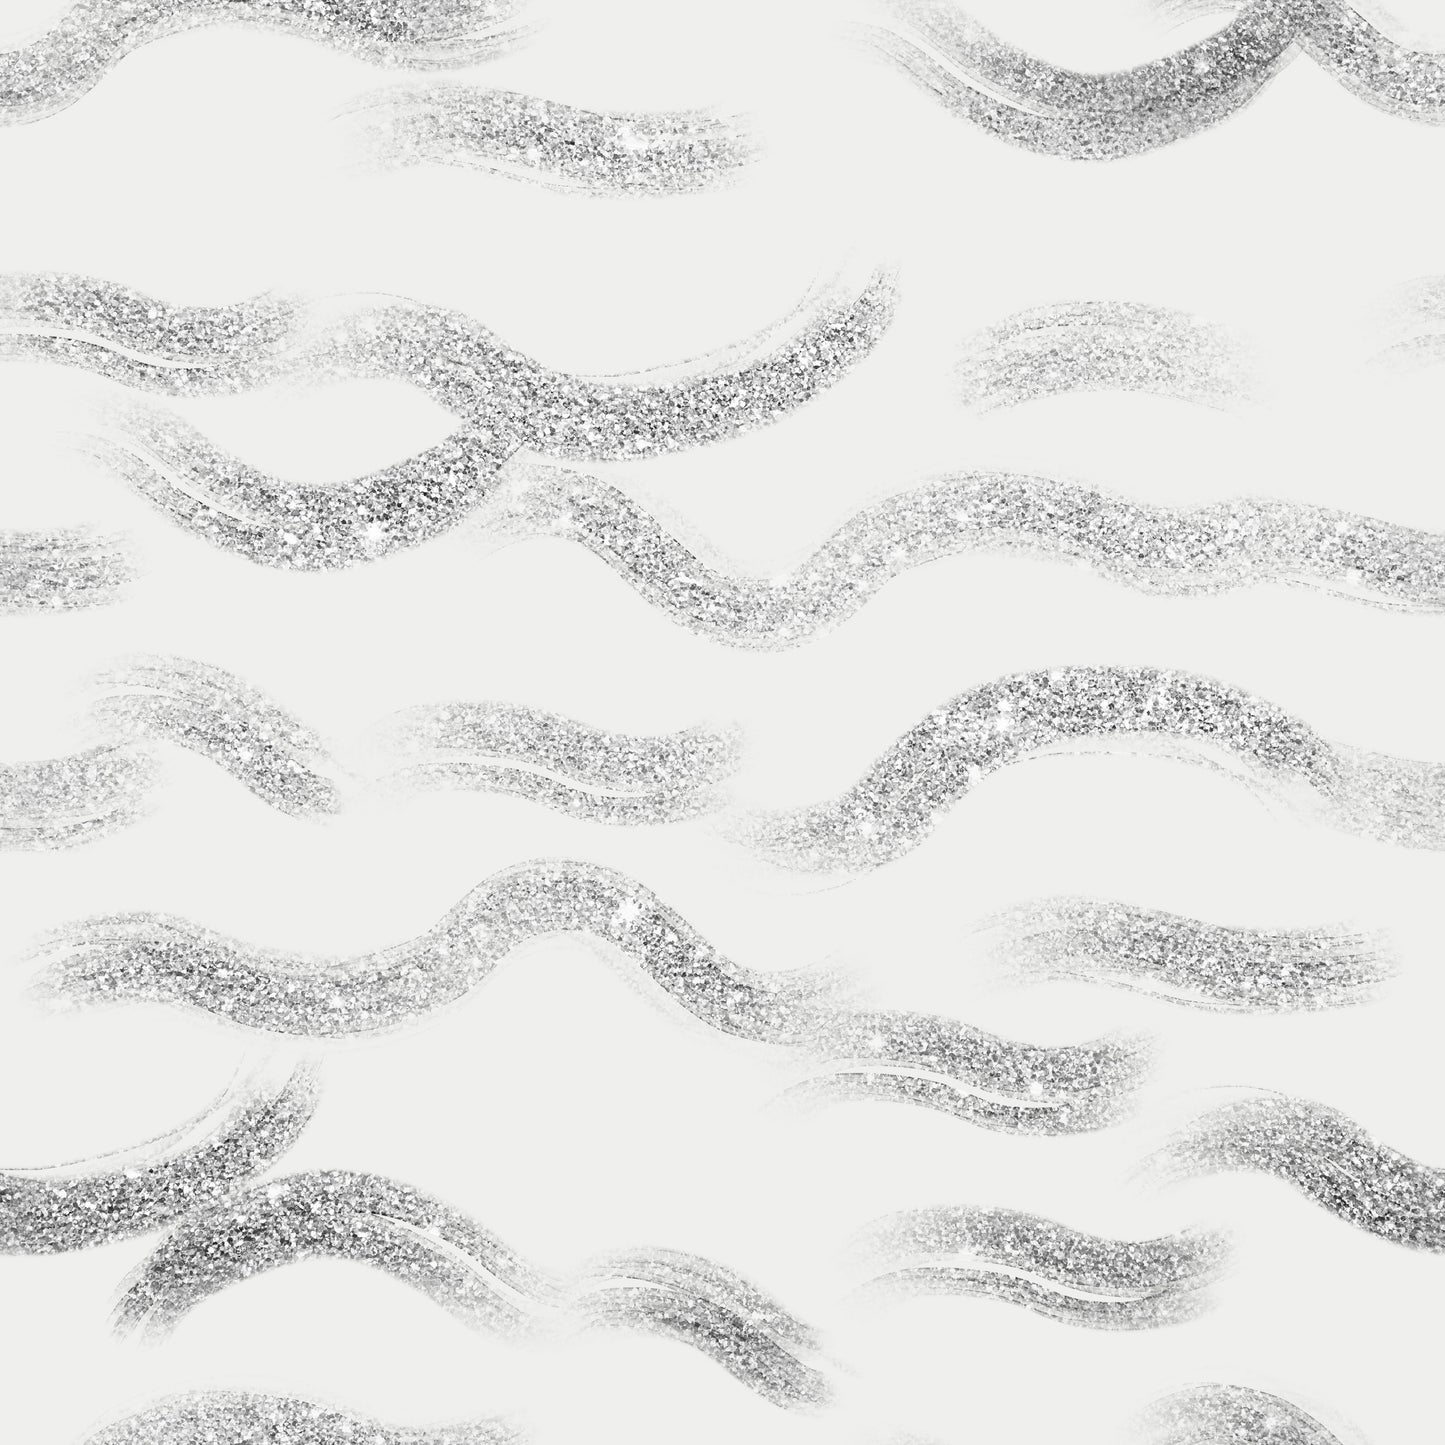 White & Charcoal Wavy Smudges Self Adhesive Vinyl